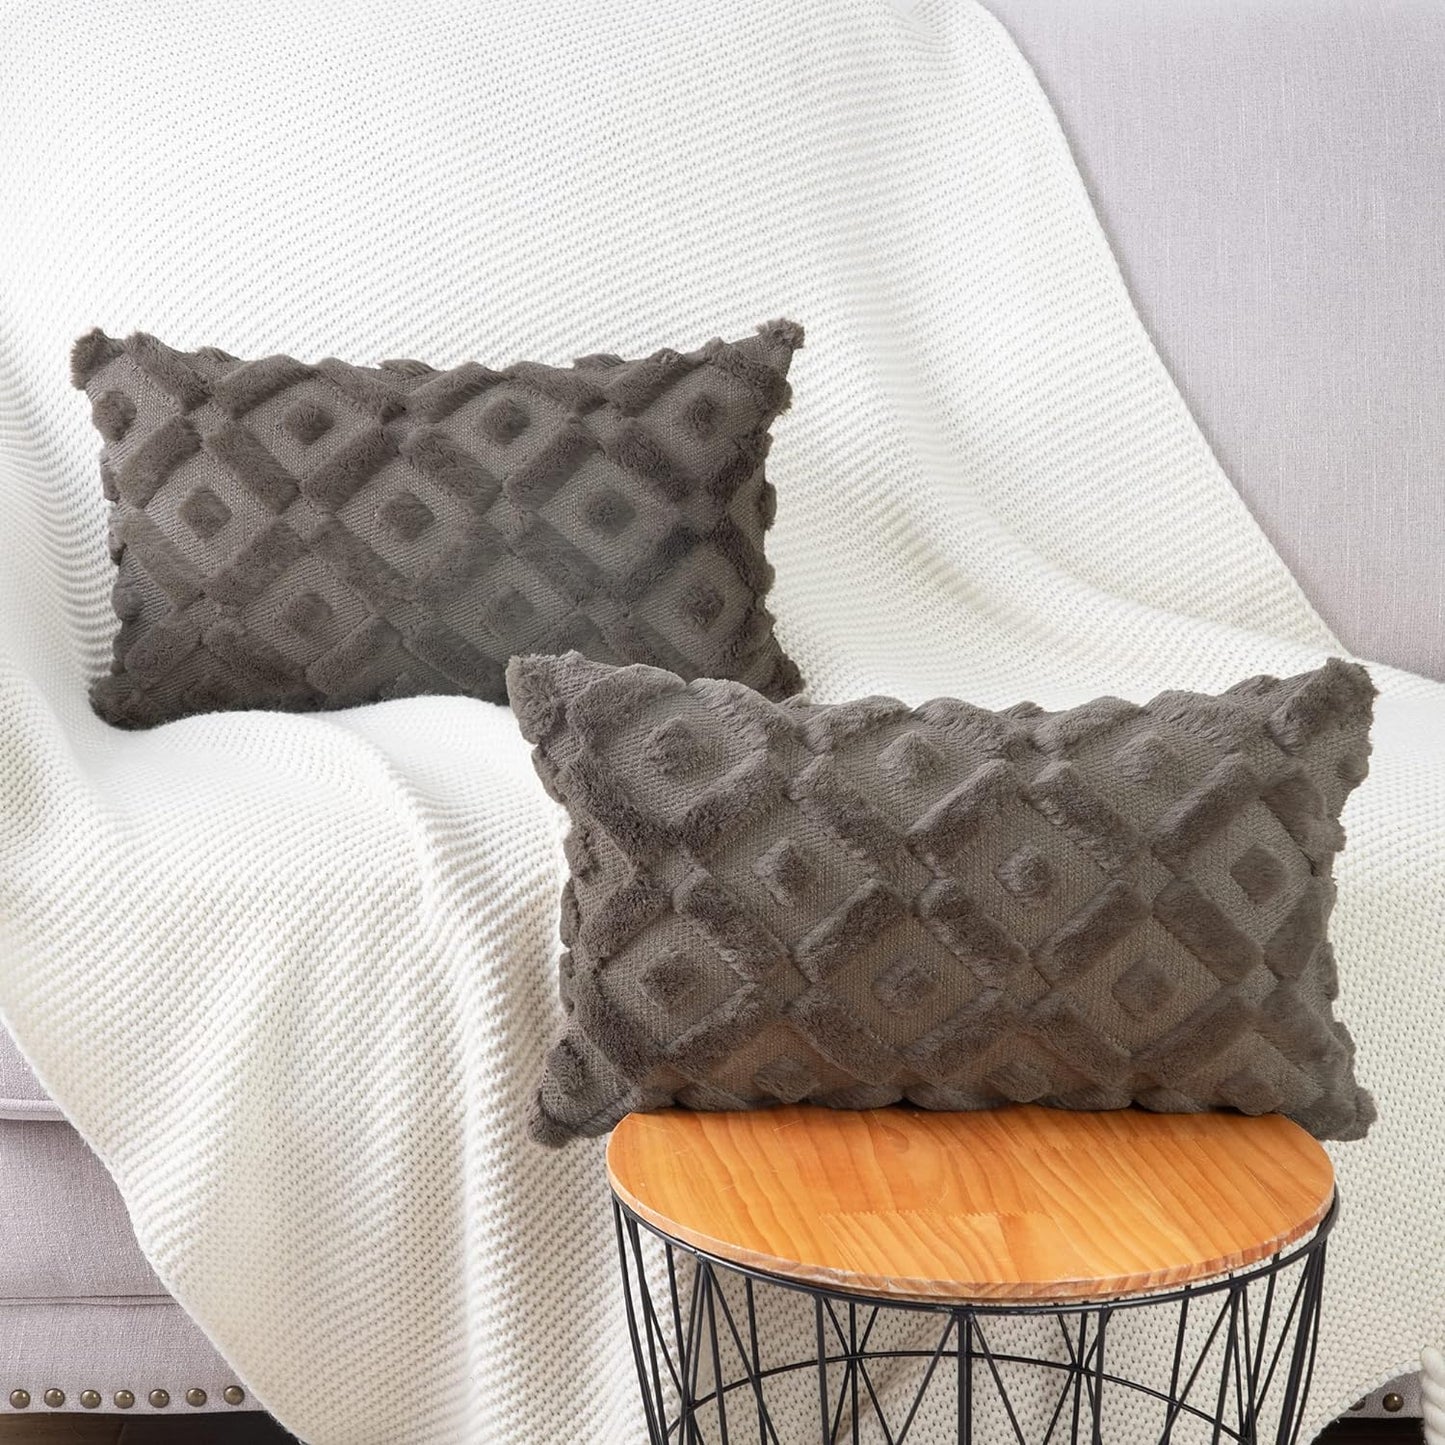 Set of 2 Taupe Plush Short Wool Throw Pillow Covers 12X20 Inch Rectangular Super Soft Cozy Decorative Velvet Cushion Cover for Sofa Bedroom Livingroom Pillow Shell